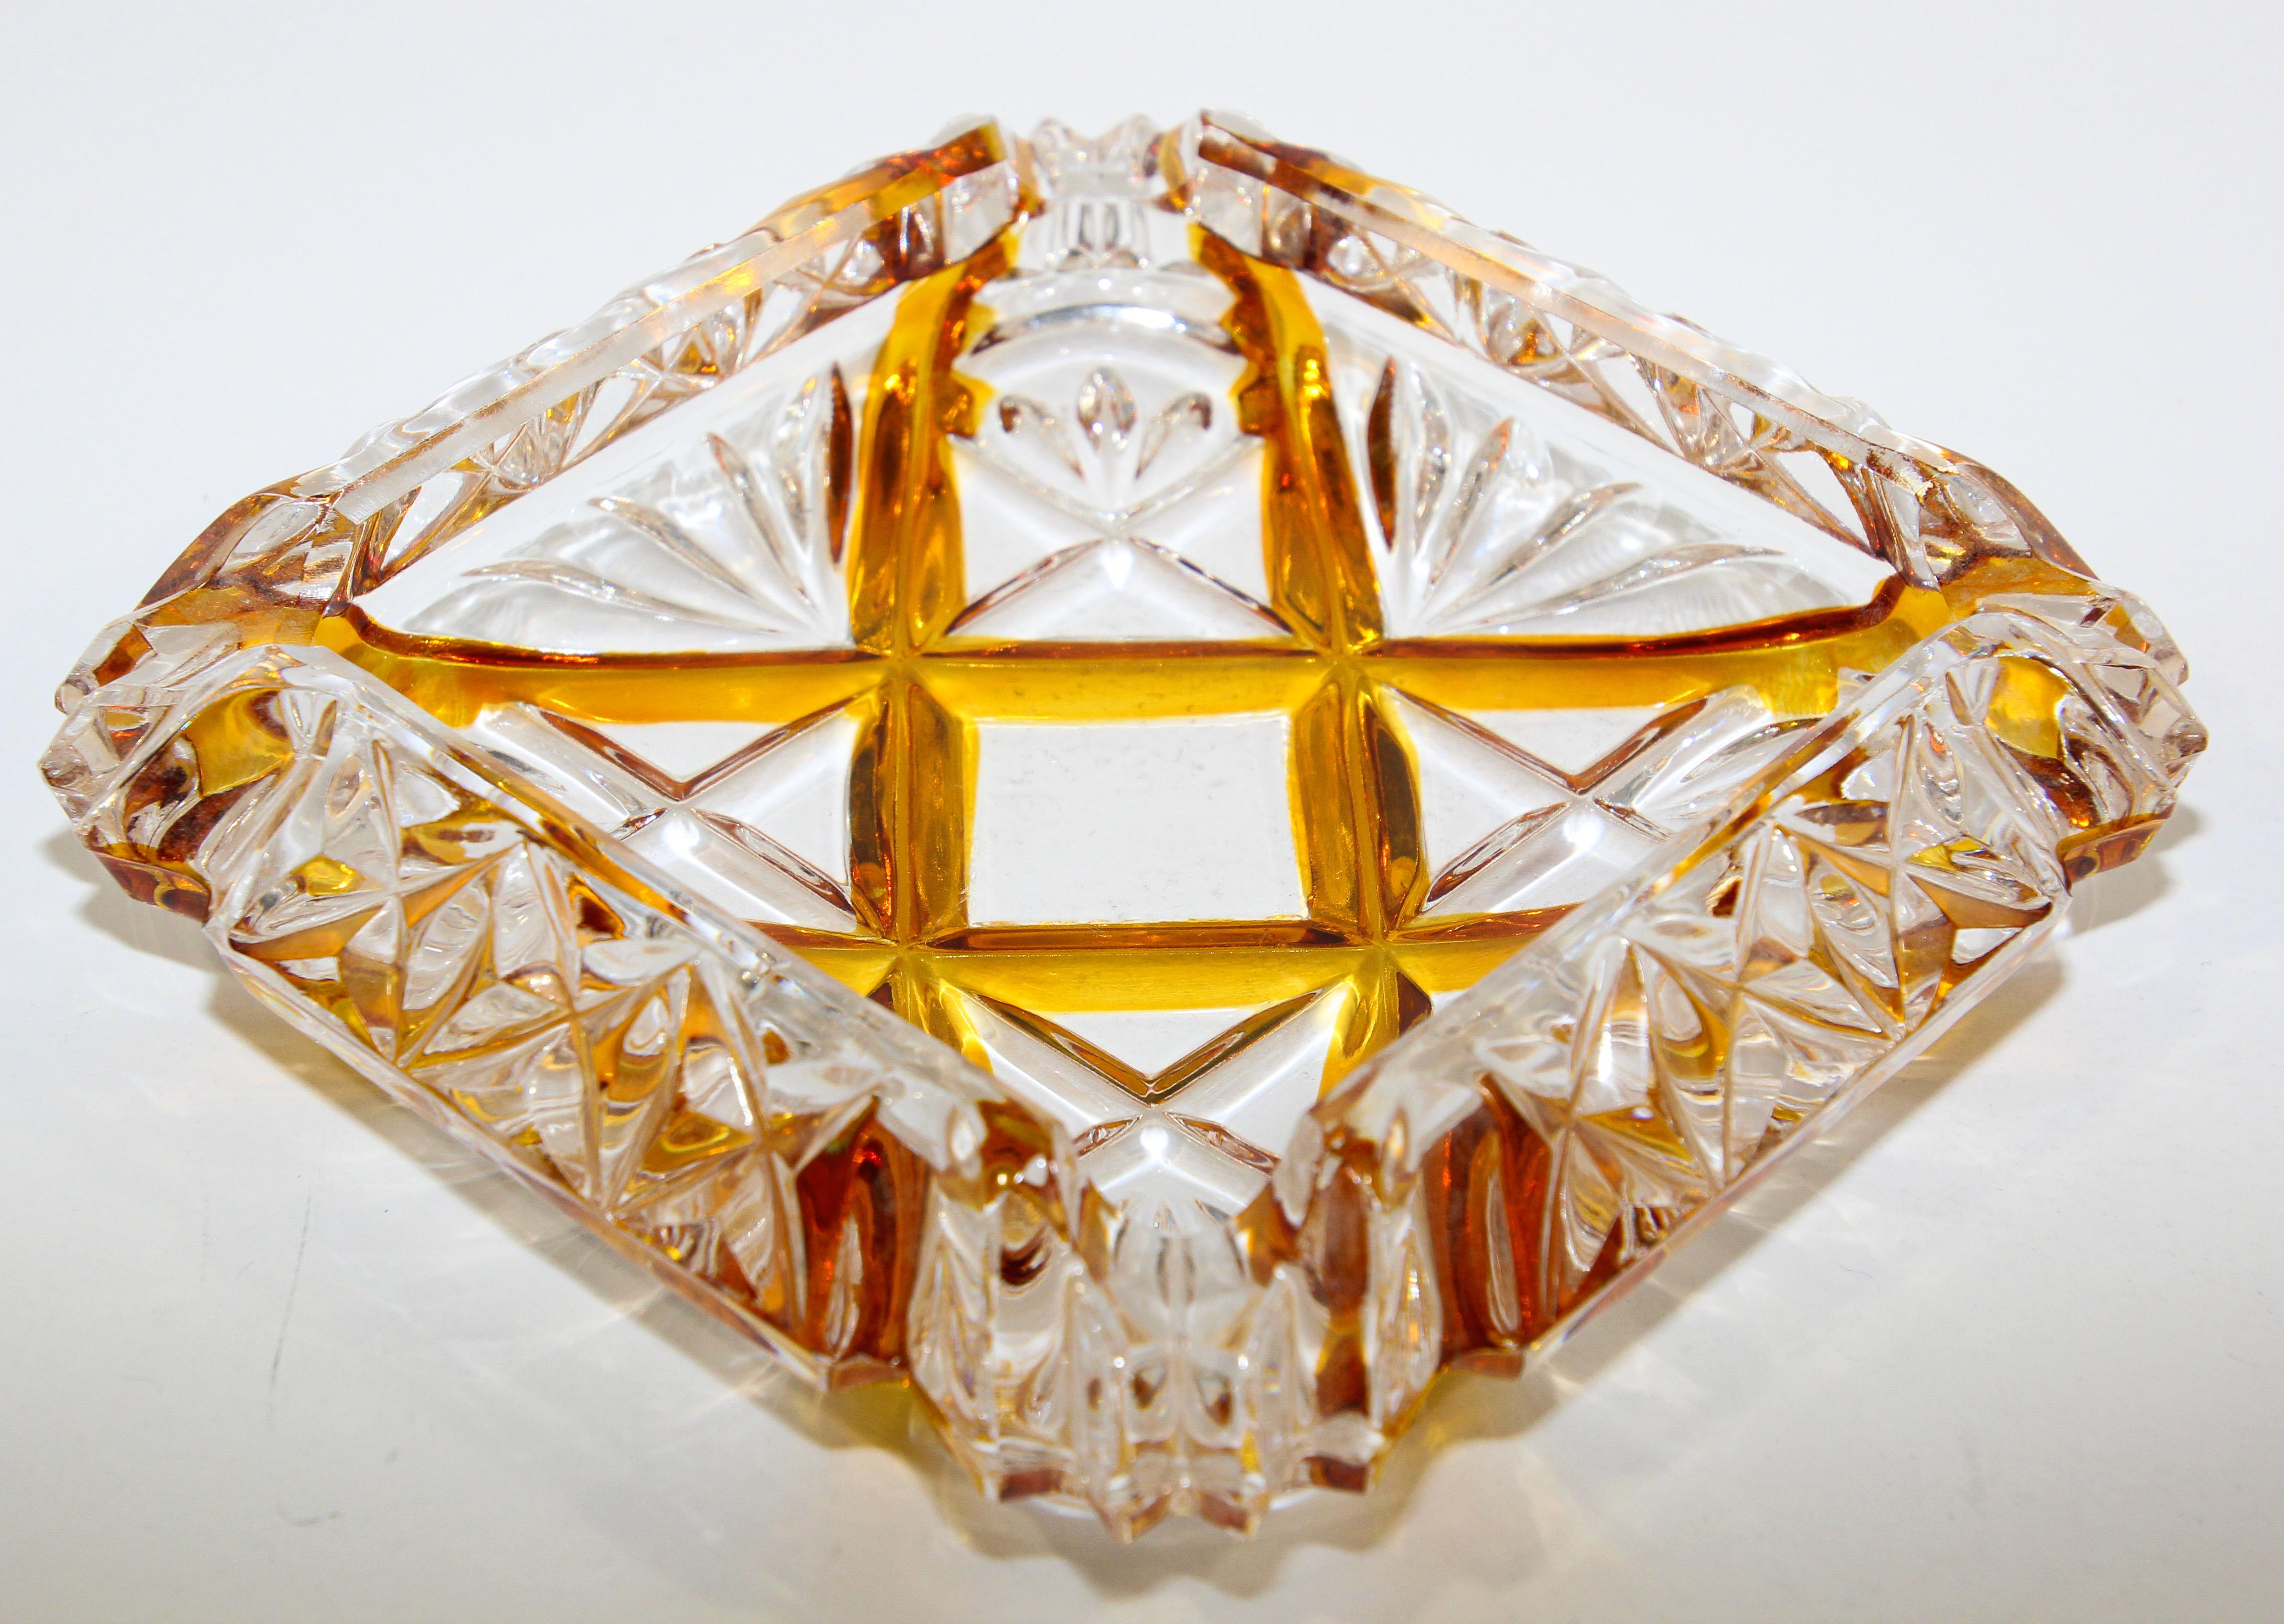 Exceptional luxury Art Deco Bohemian Karl Palda crystal cut ashtray.
Stunning Art Deco details like the streamlined shape with cut-glass engraved pattern combining geometrical details with amber color glass.
This Art Deco glass ashtray was designed